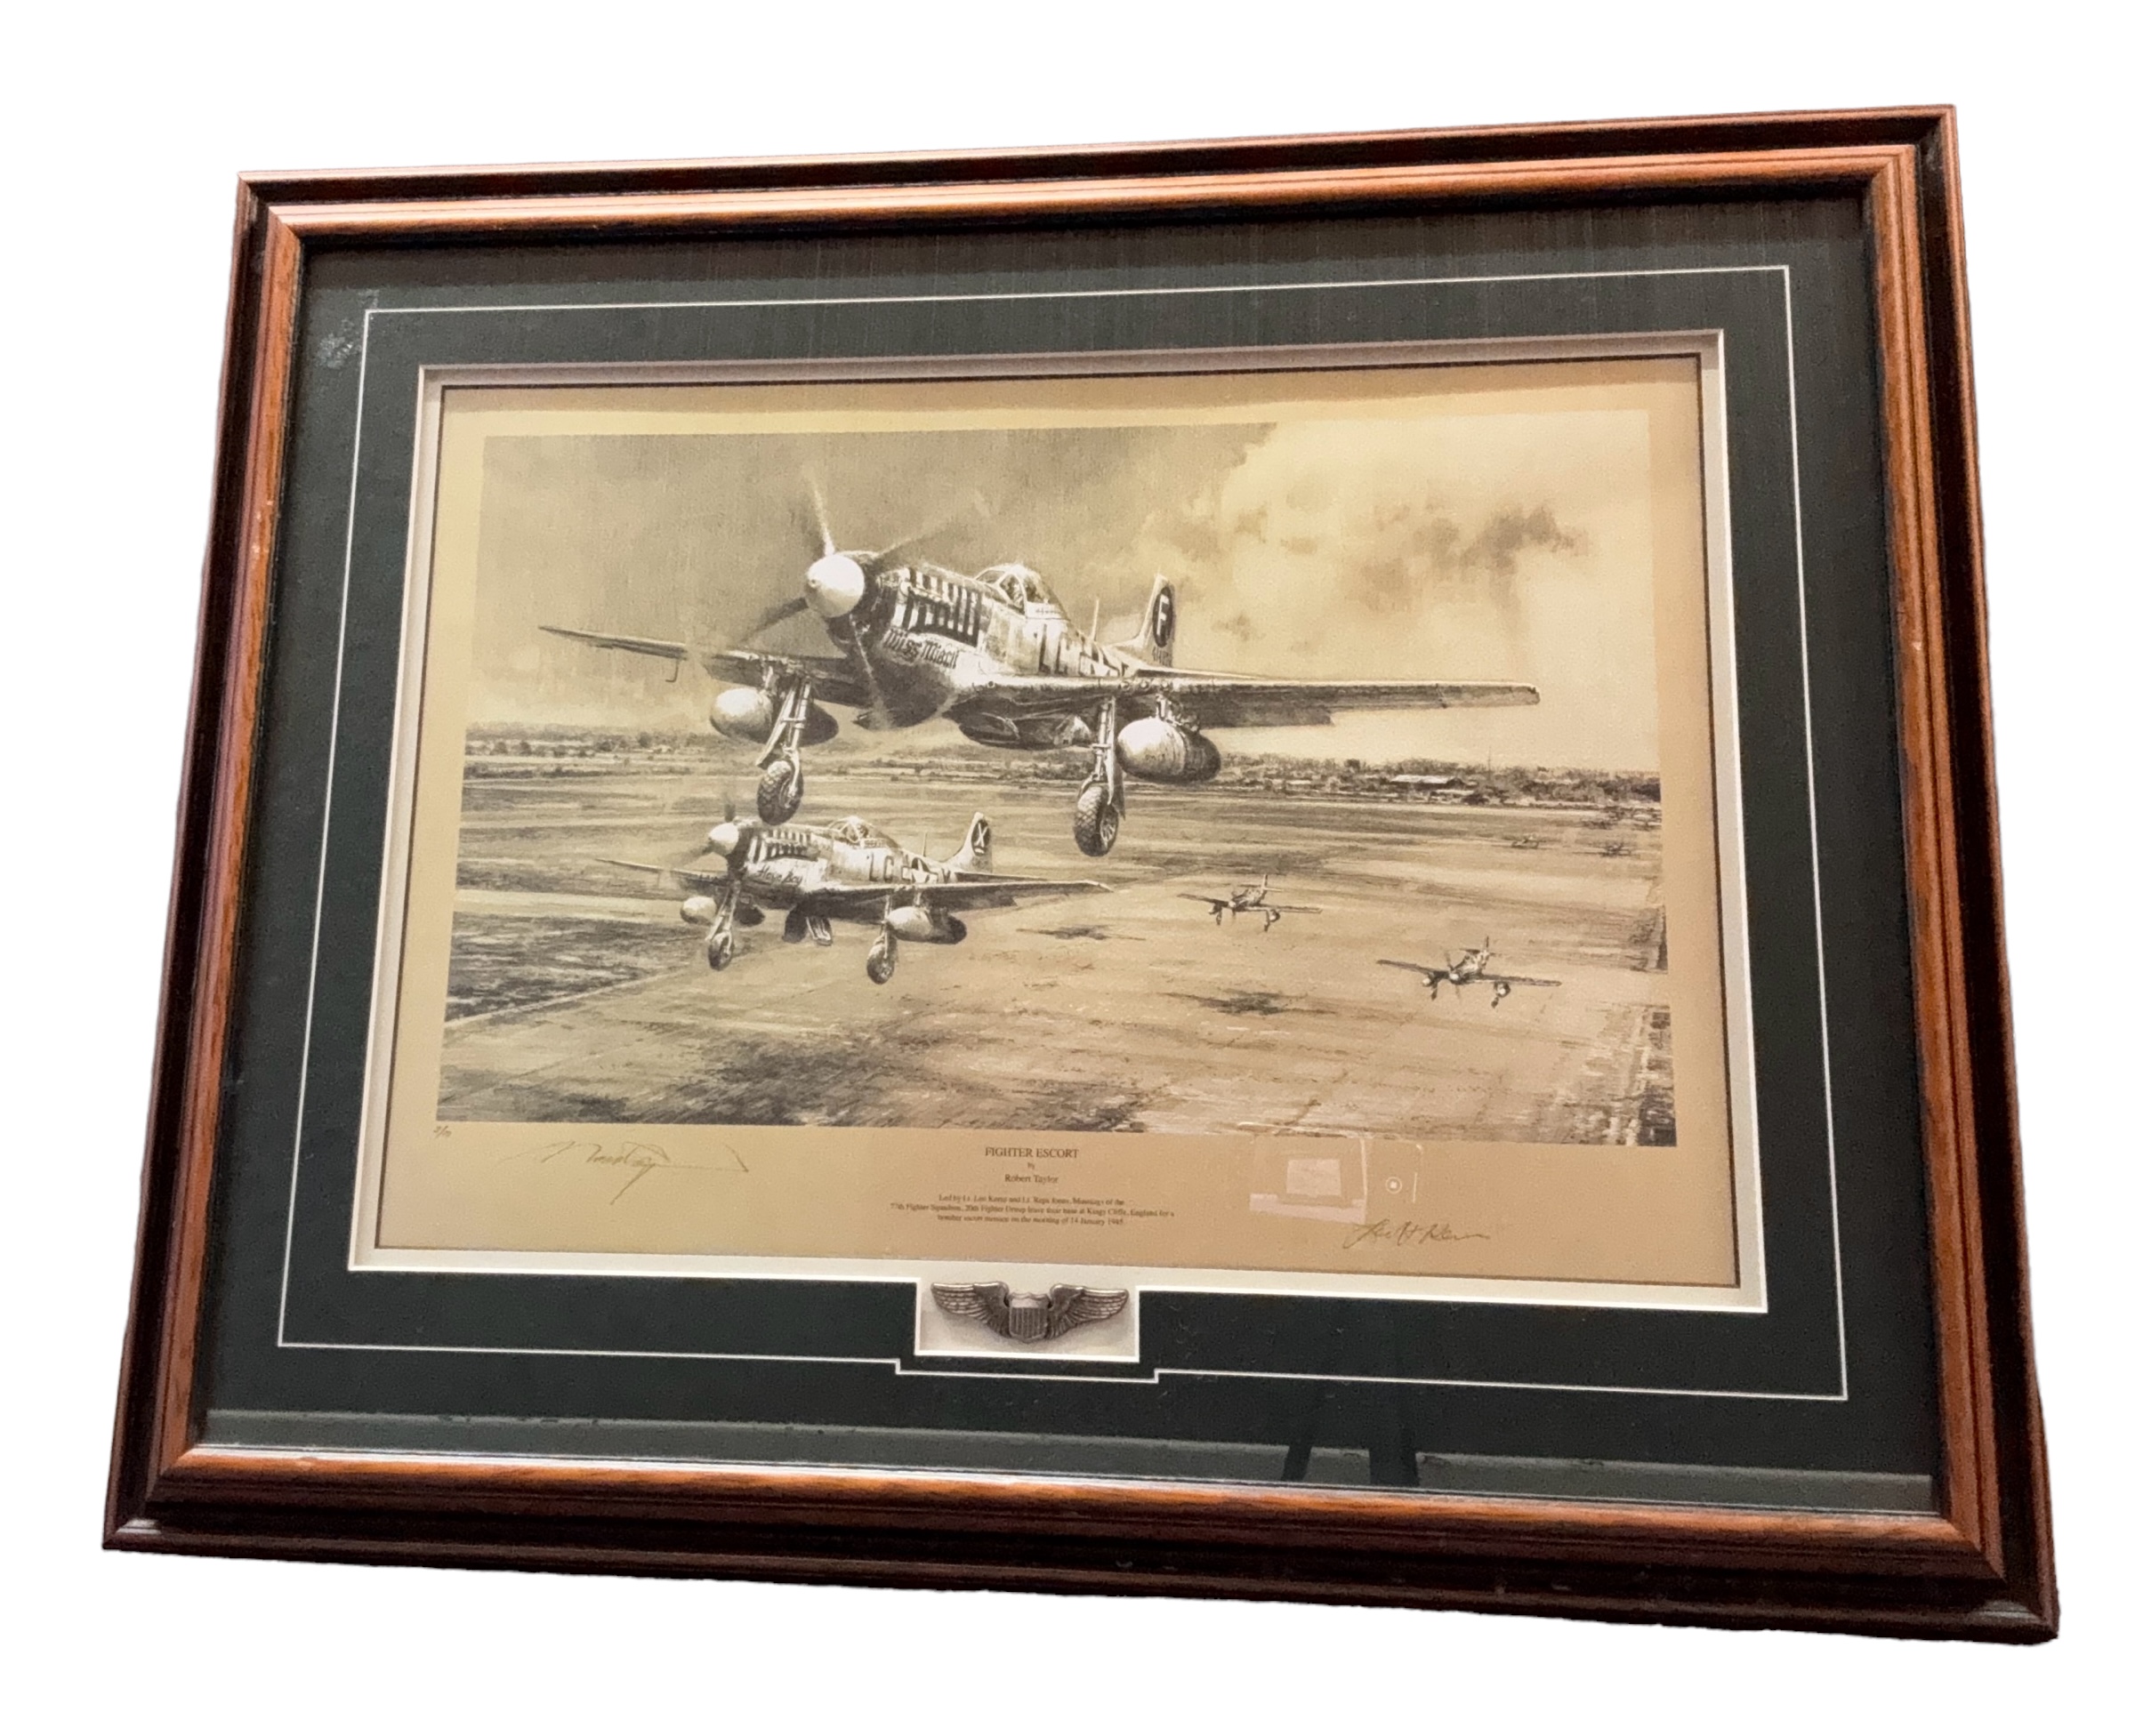 Fighter Escort WWII print 29x24 inch framed and mounted limited edition 3/10 signed in pencil by the - Image 2 of 3